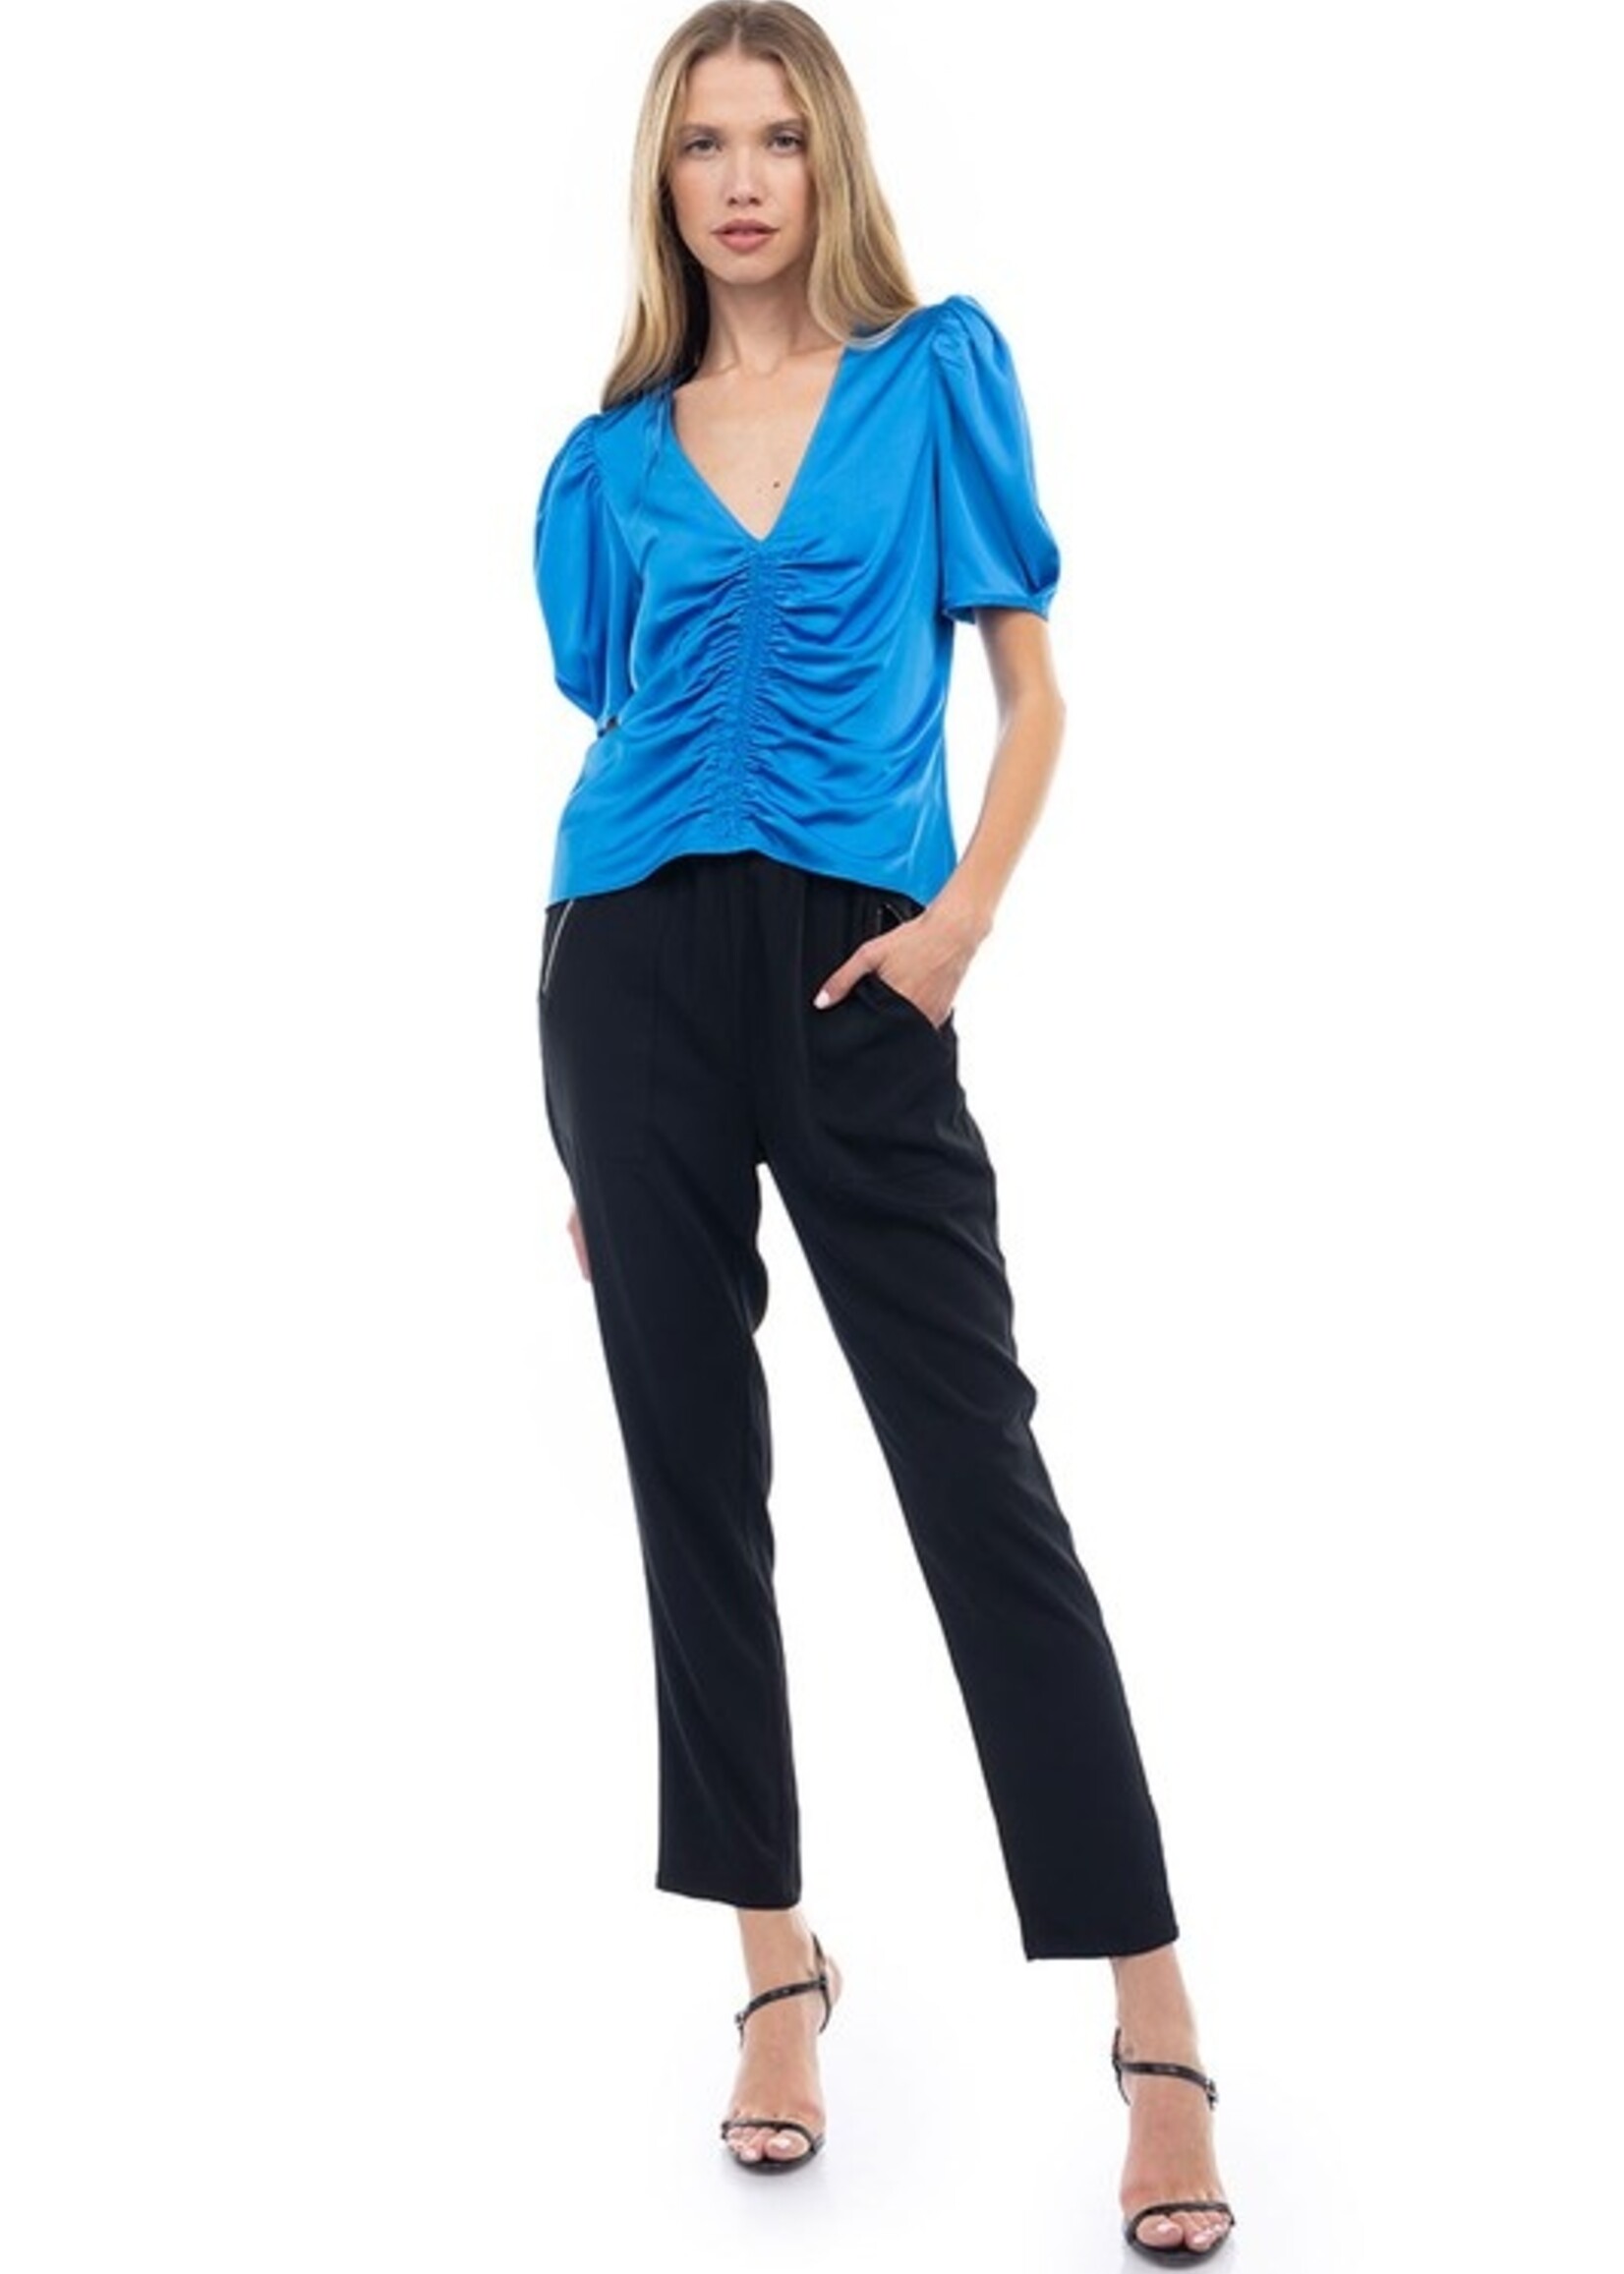 Shirred puff sleeve top +3 colors